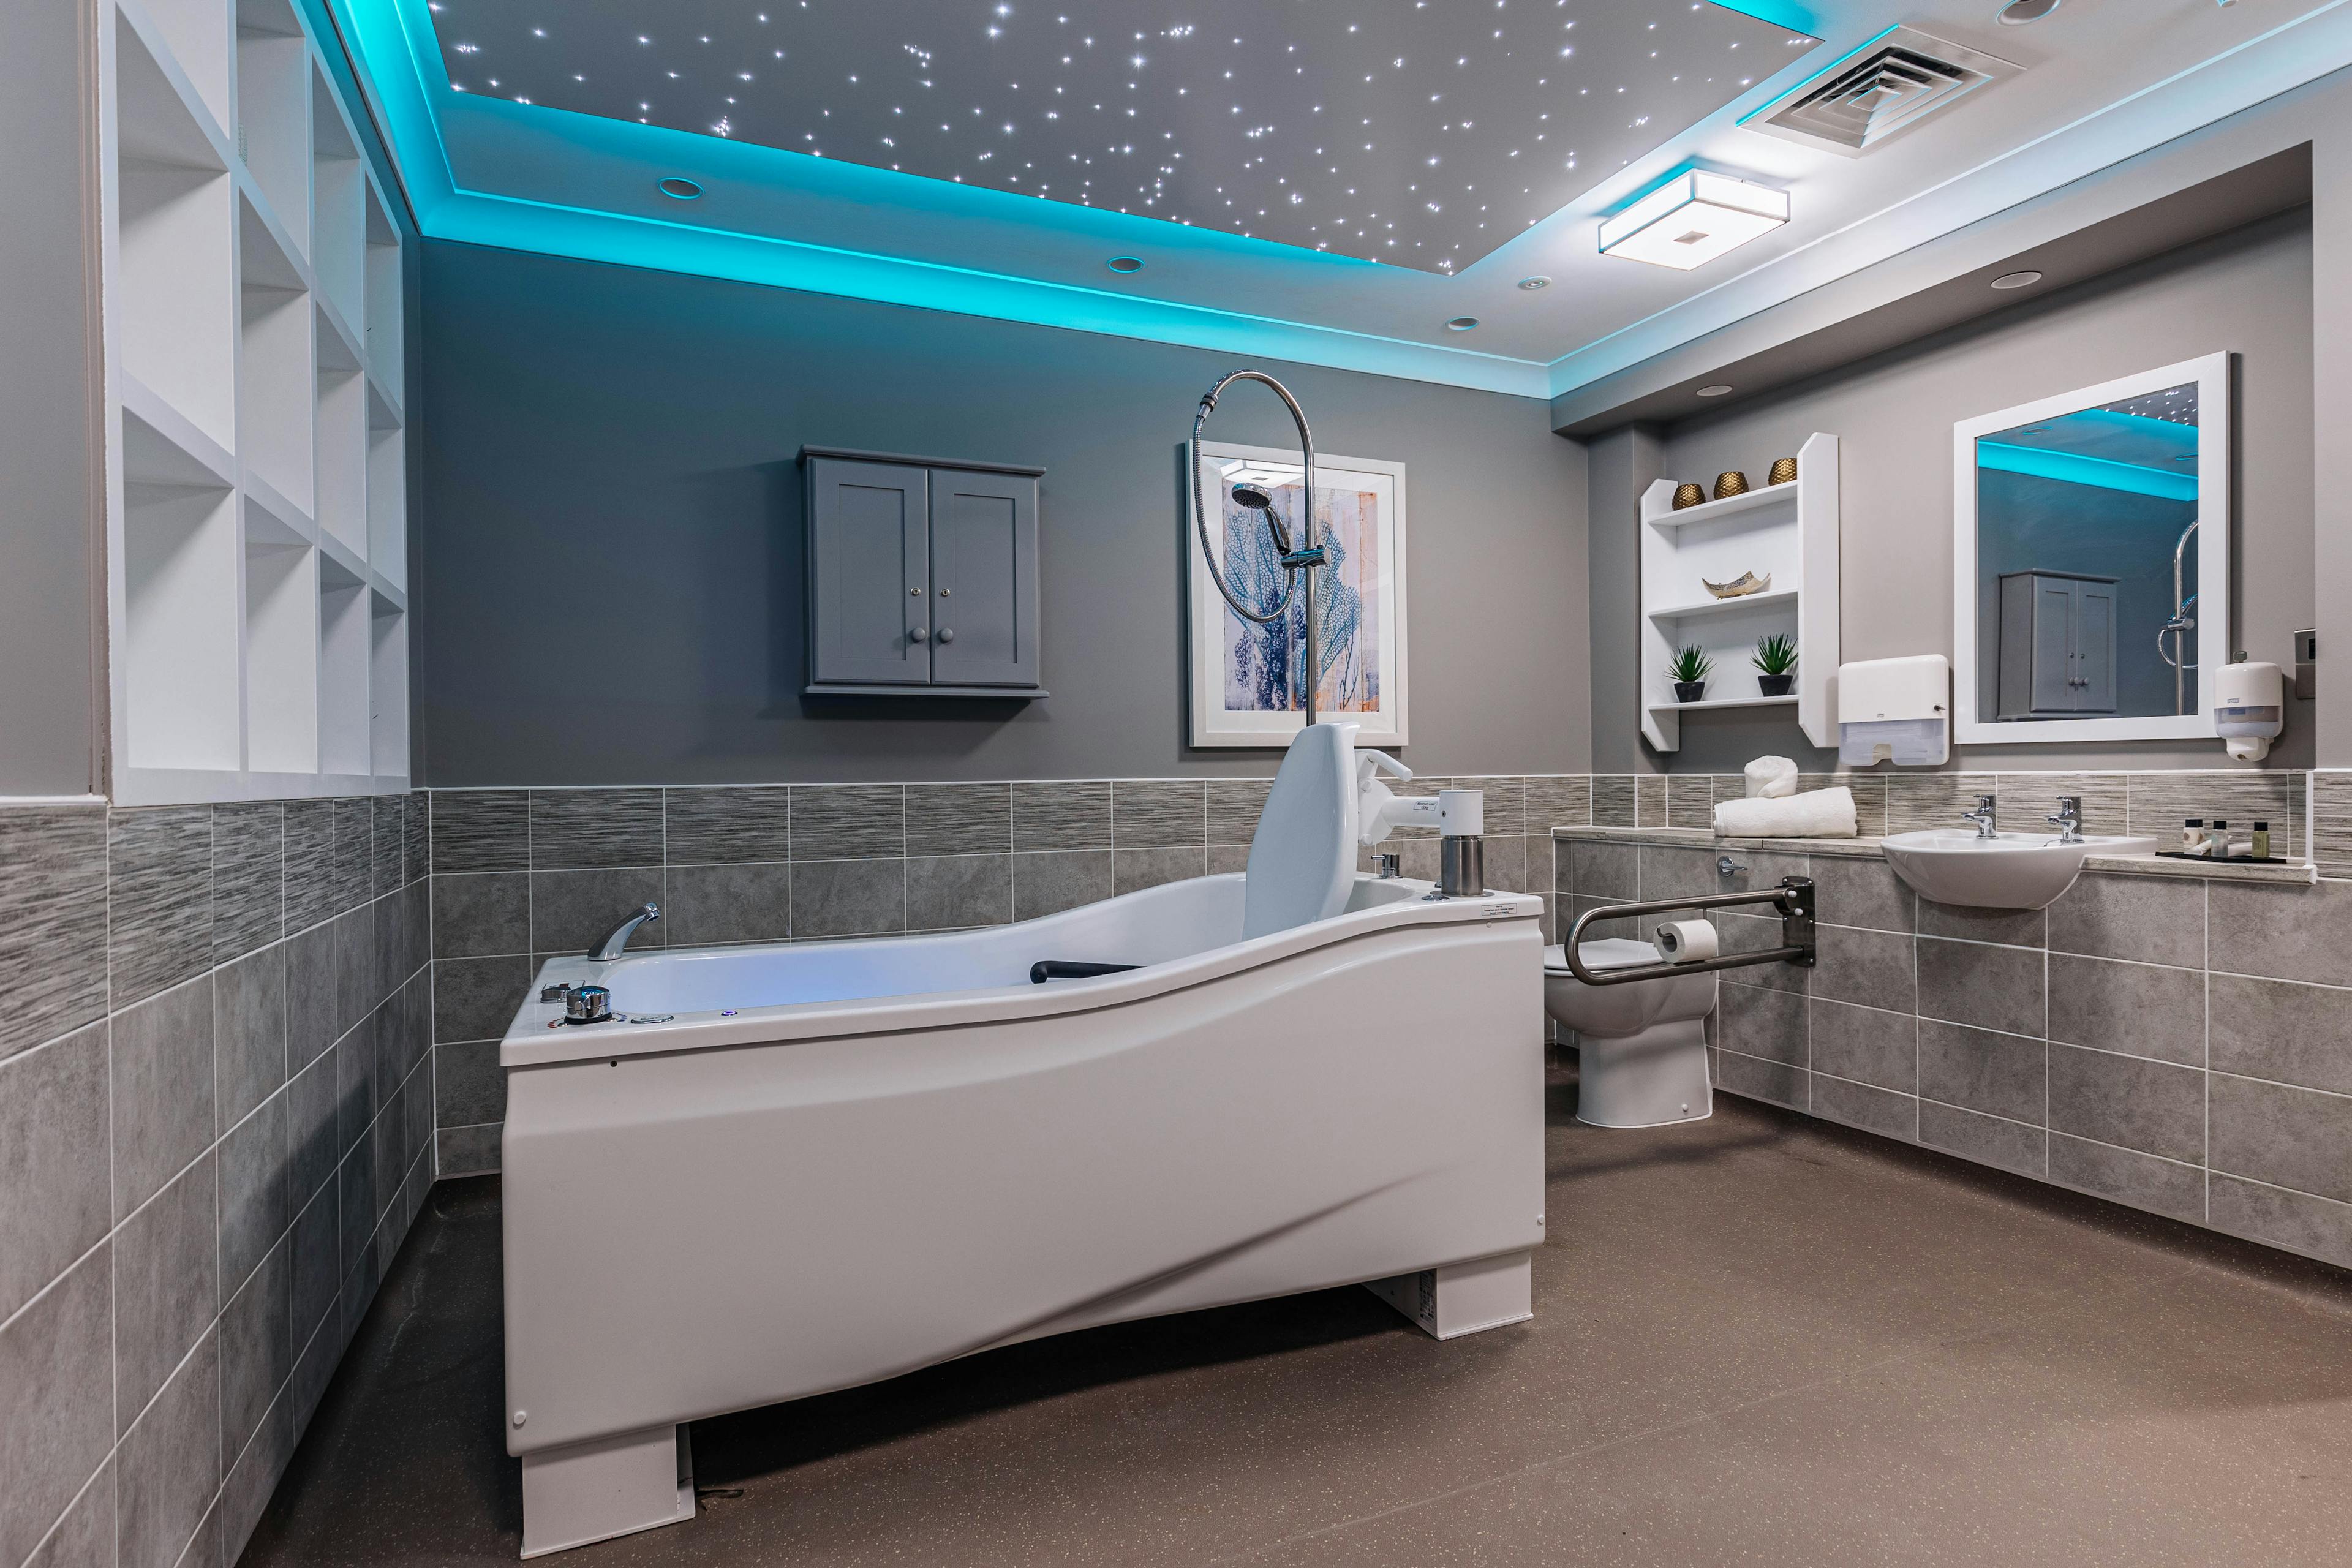 Spa Bathroom at Parley Place Care Home in Ferndown, Dorset